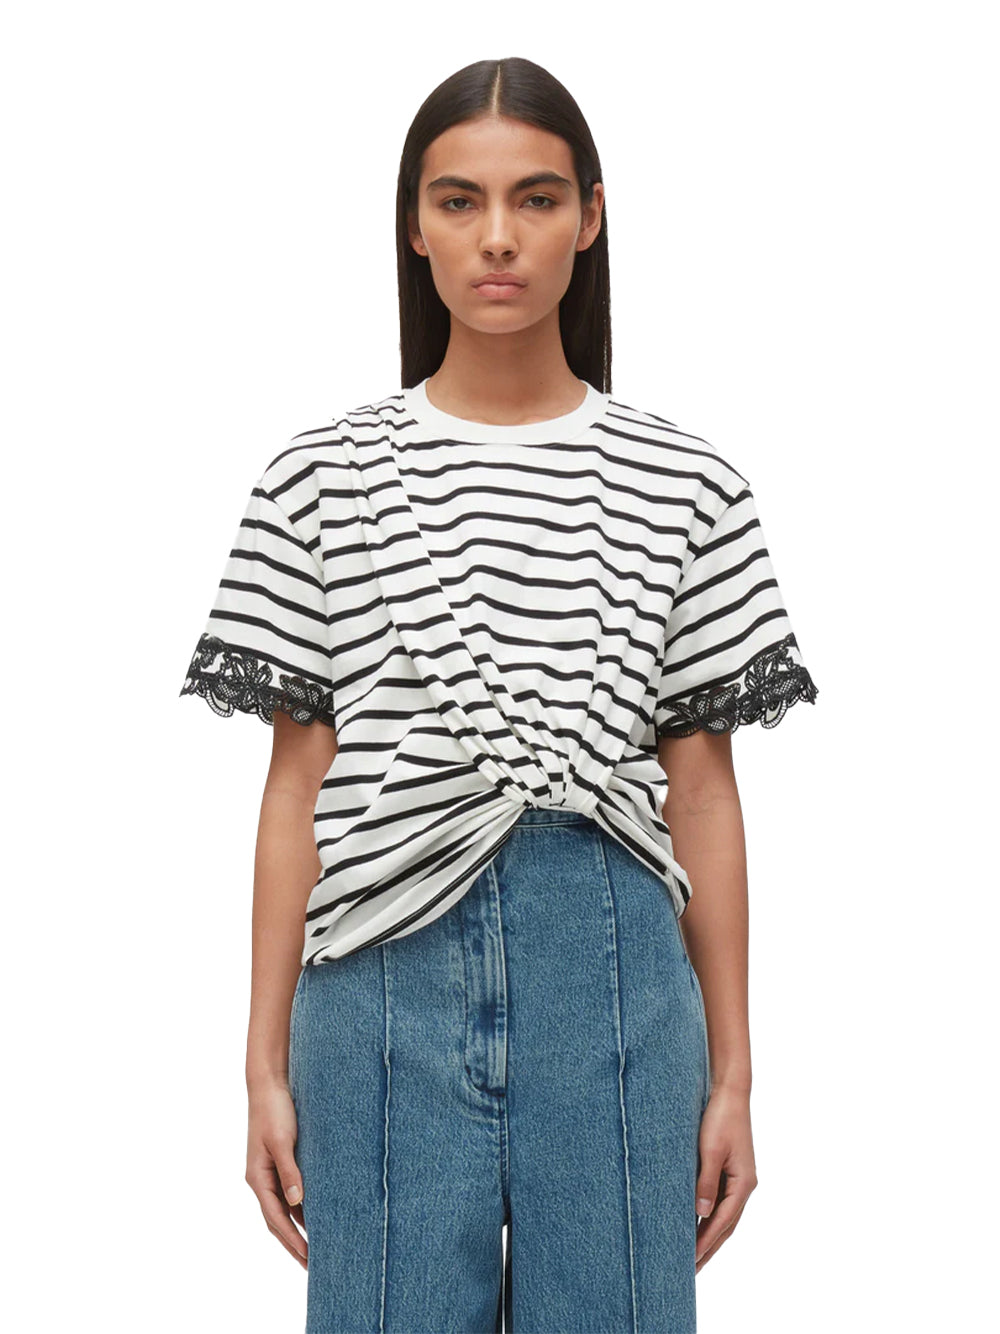 Draped Tee with Lace Embroidery (White Multi Striped)